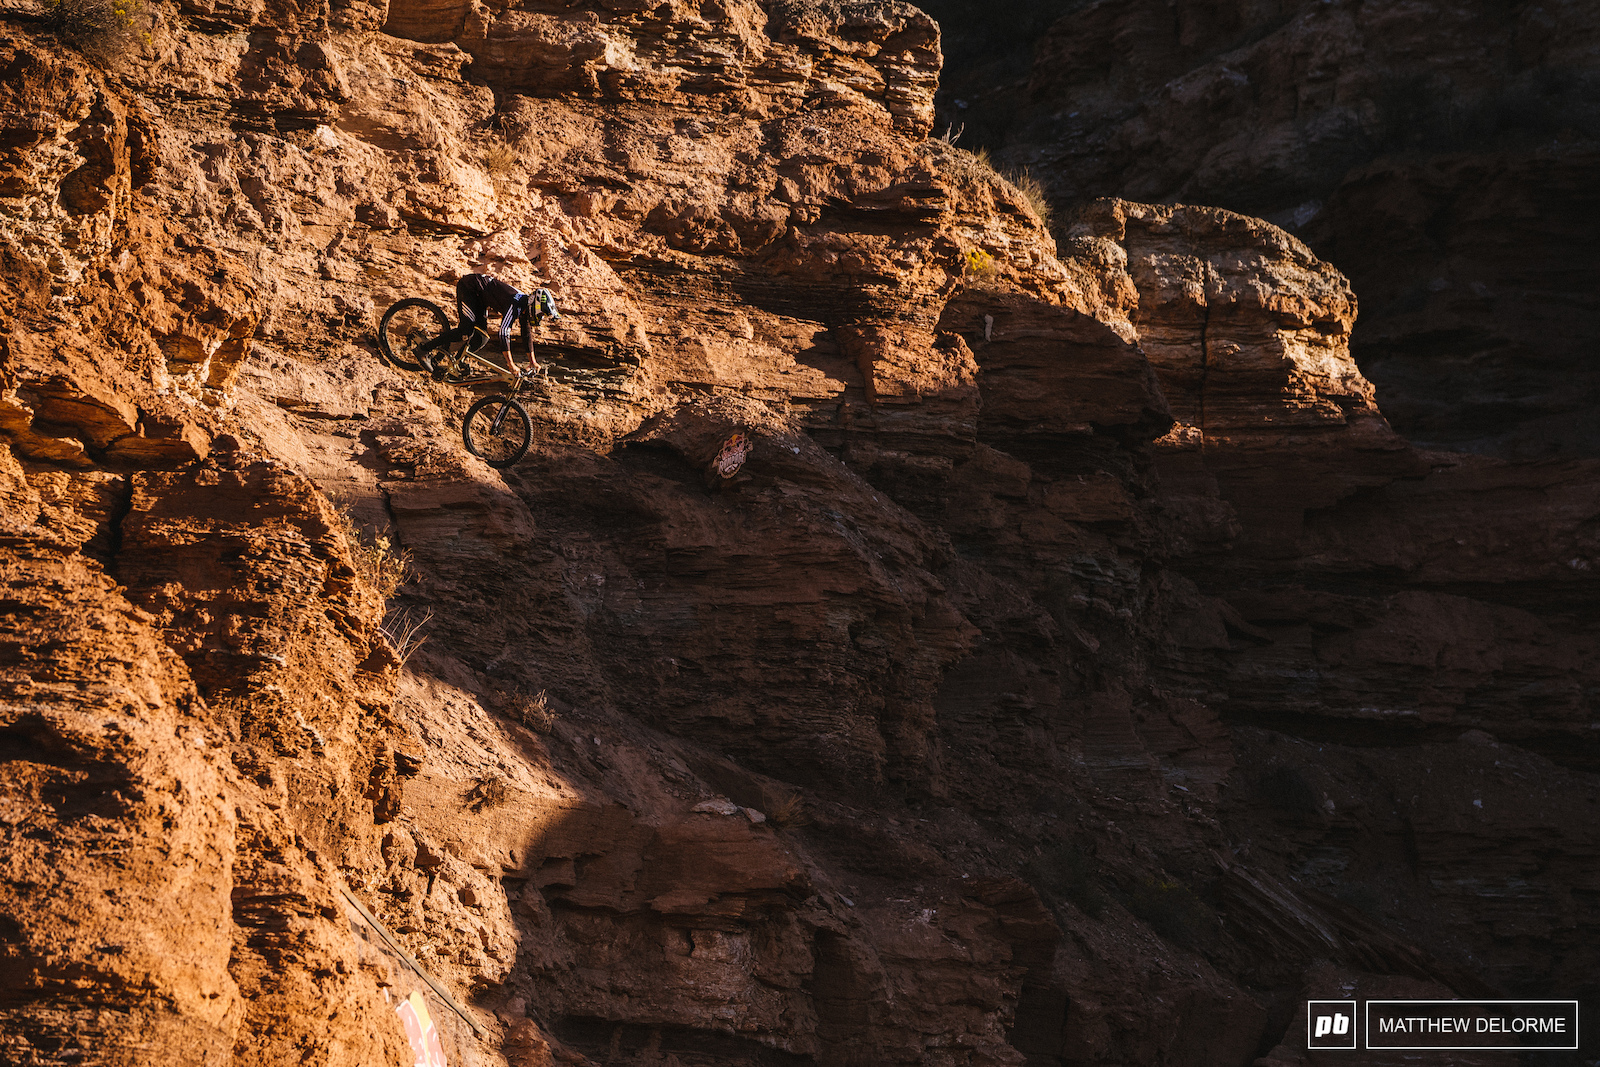 Brendan sent the rock the canyon gap and the chute today. His run is pretty much linked up at this point. One of the few riders nearly ready to go tomorrow.